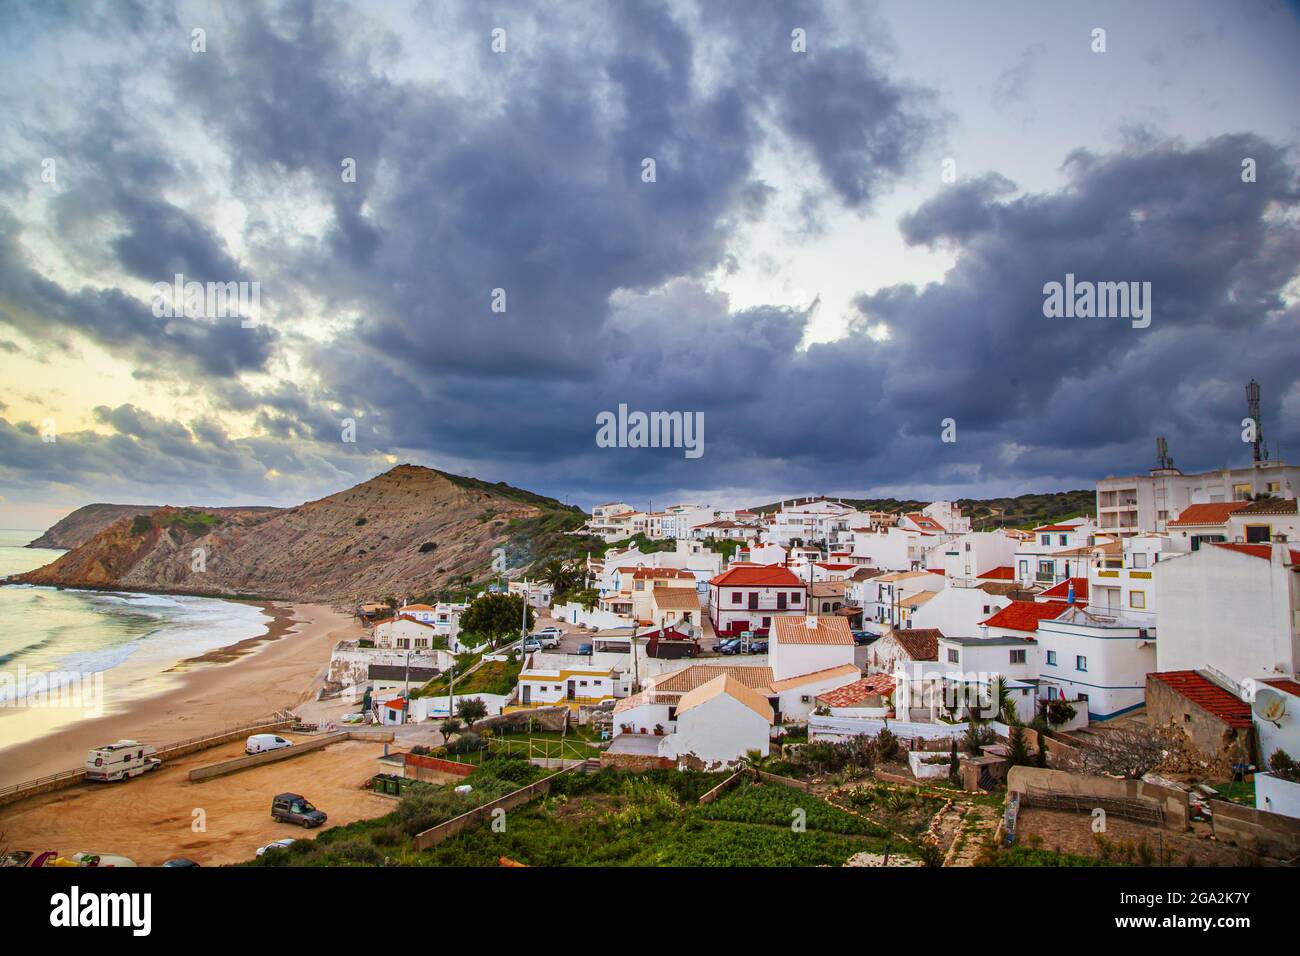 Dramatic grey cloud formation swirling above the traditional fishing village of Burgau in the municipality of Vila do Bispo in the Western Region o... Stock Photo